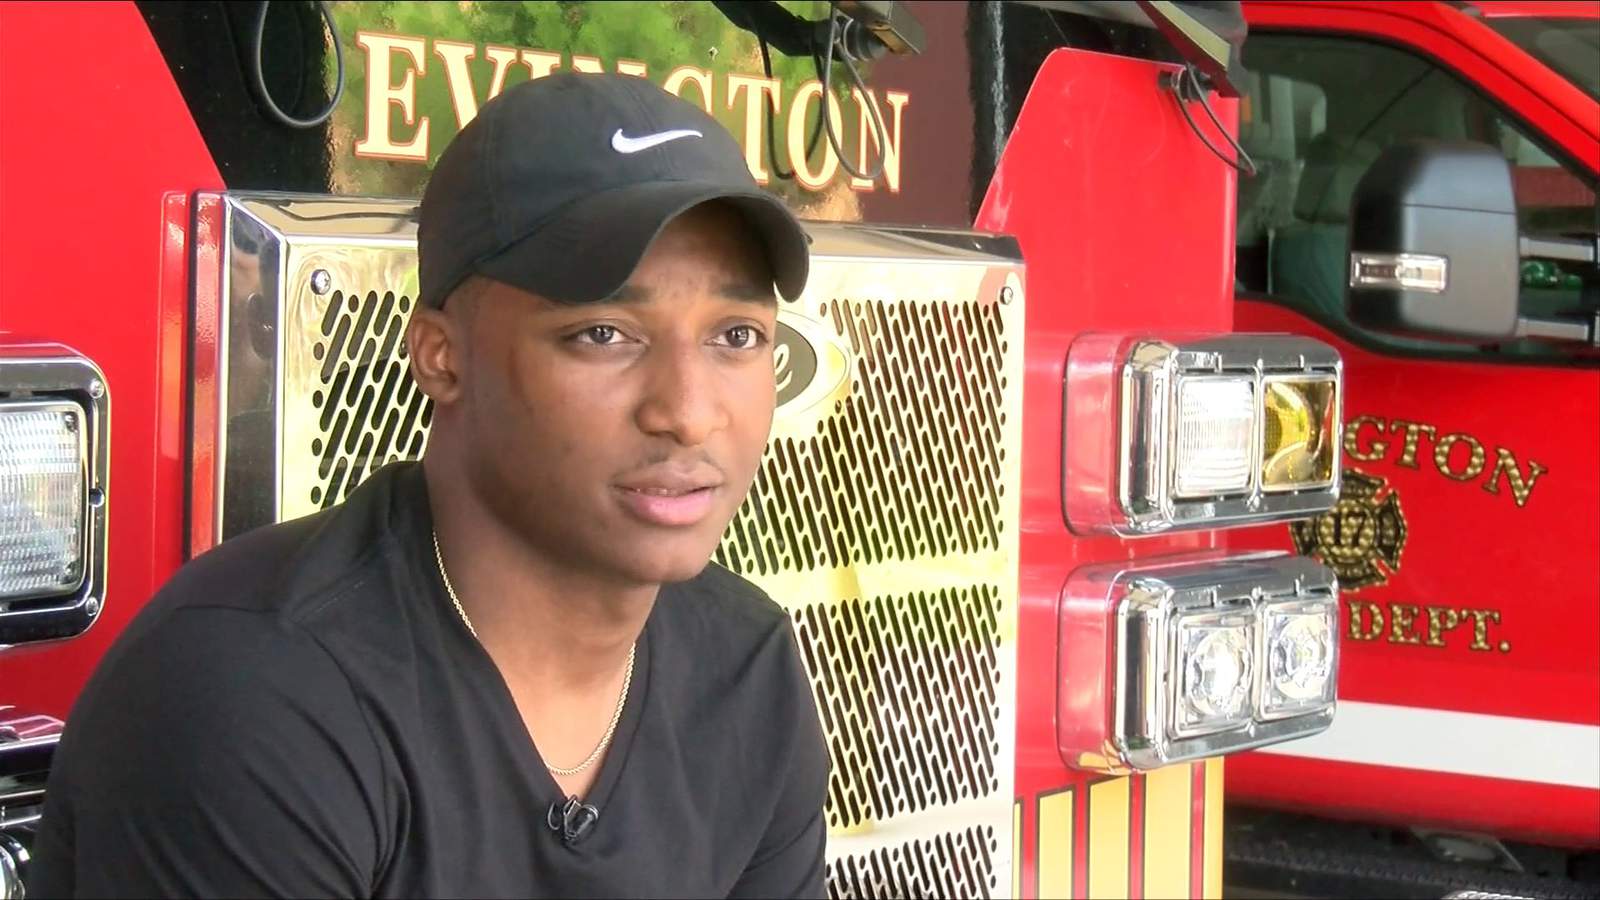 'Two strangers met under the worst possible circumstances’: Teen saves woman on James River